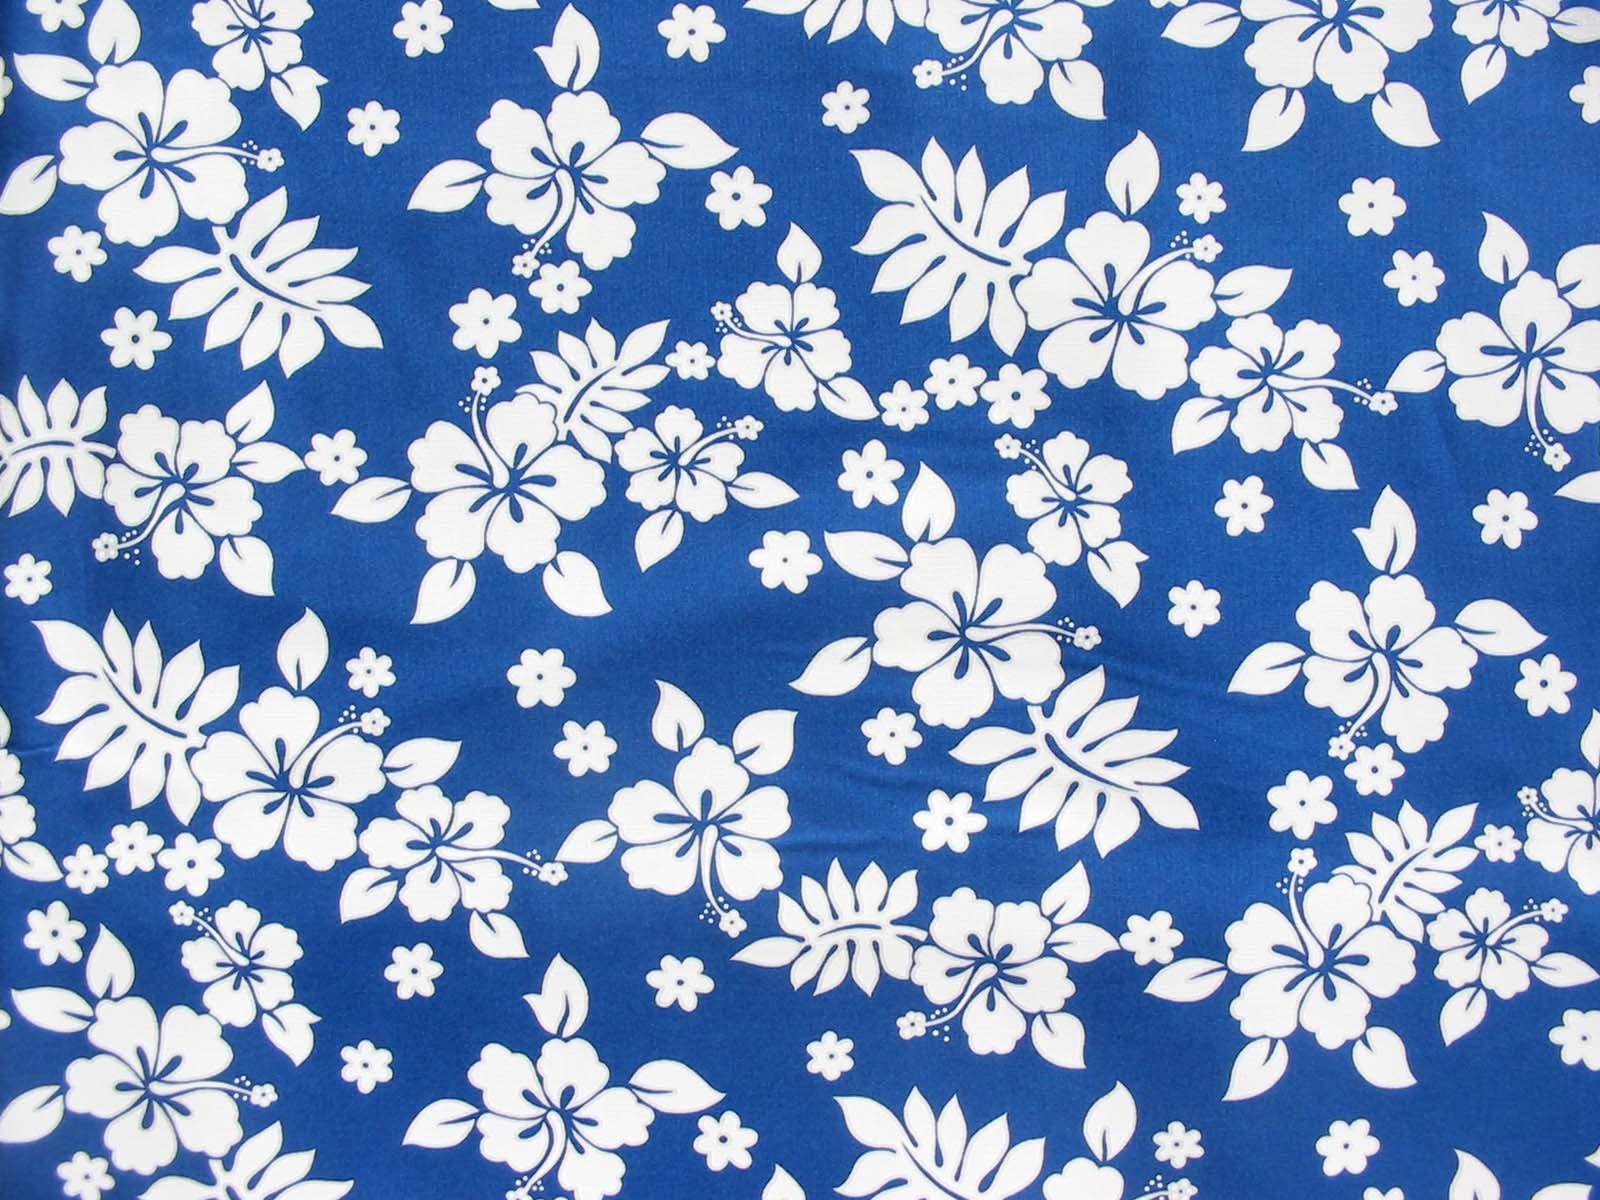 Blue Hawaiian Flower Backgrounds Image & Pictures